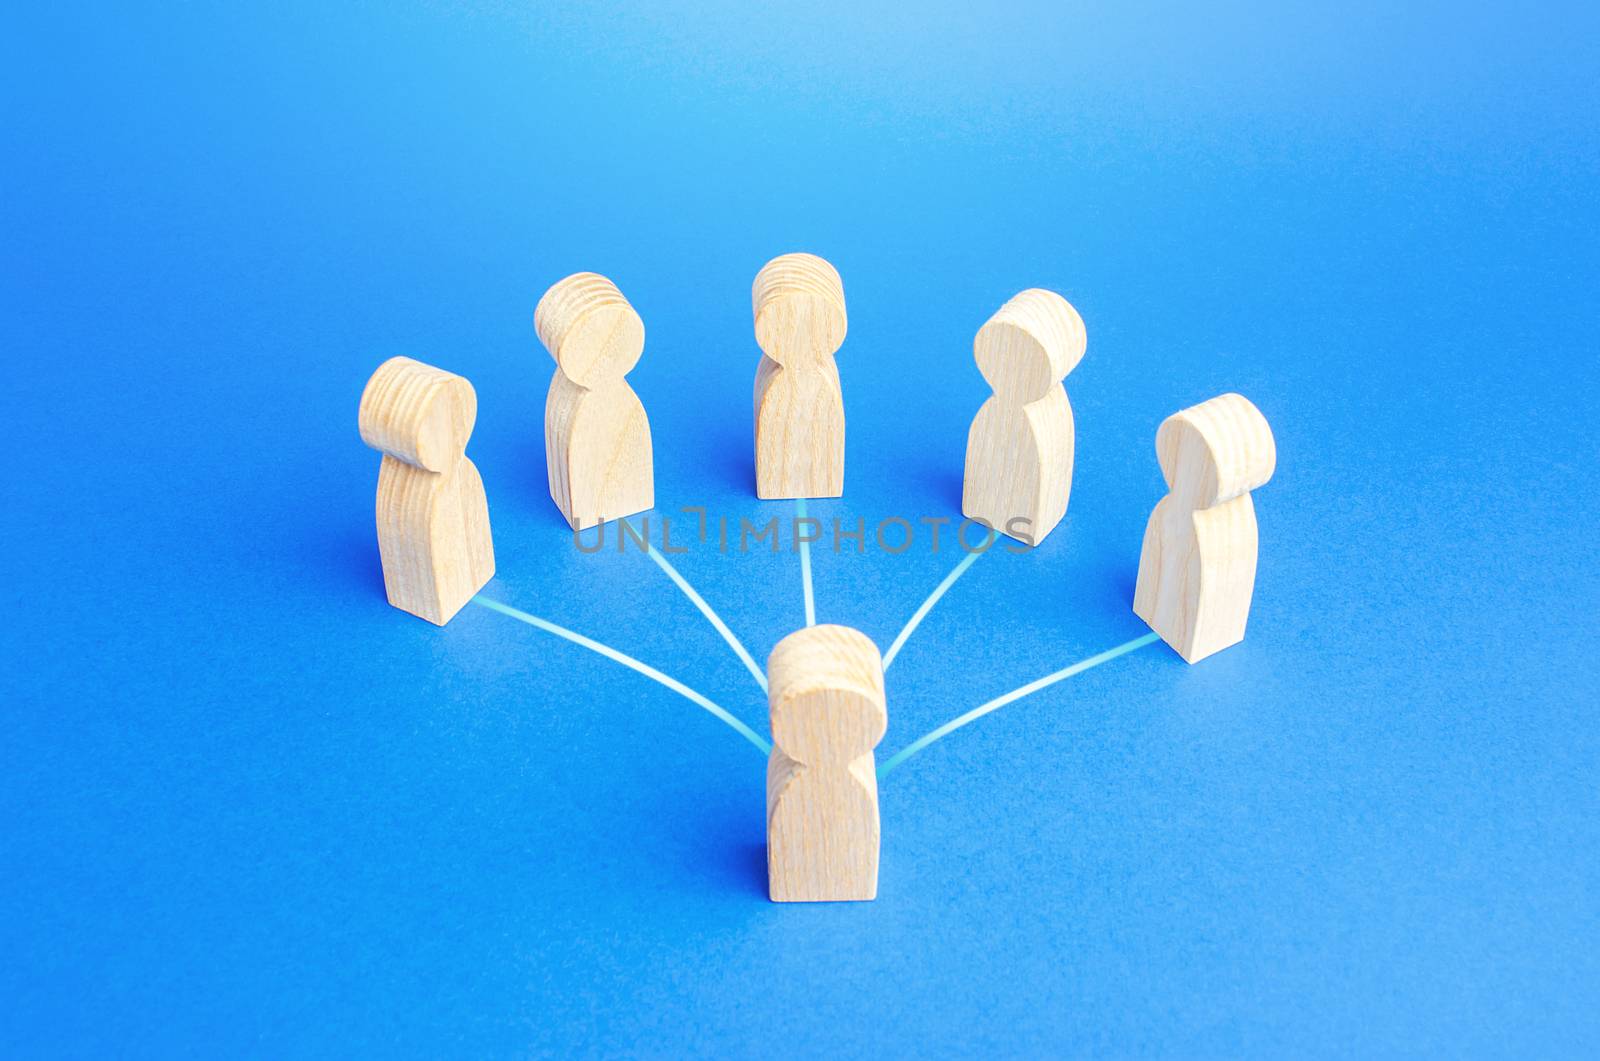 Leader person is connected by lines with employees. Teamwork, command and assignment of tasks. Authoritative influence. Leadership qualities, followers. Cooperation collaboration. Business management